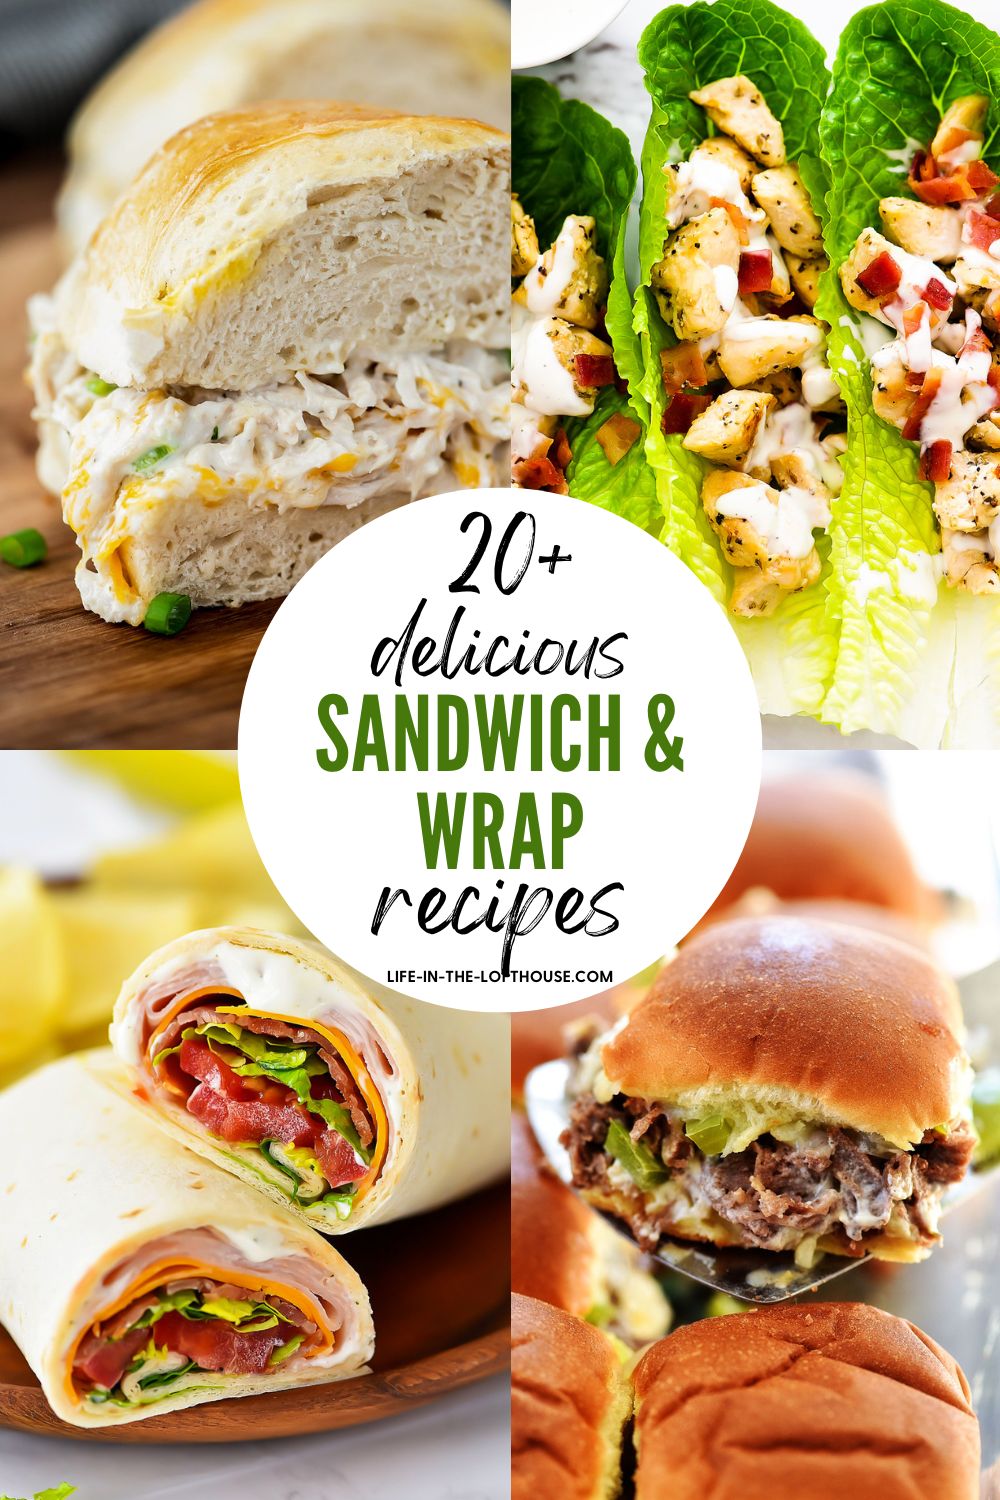 Over twenty delicious sandwich and wrap recipes.